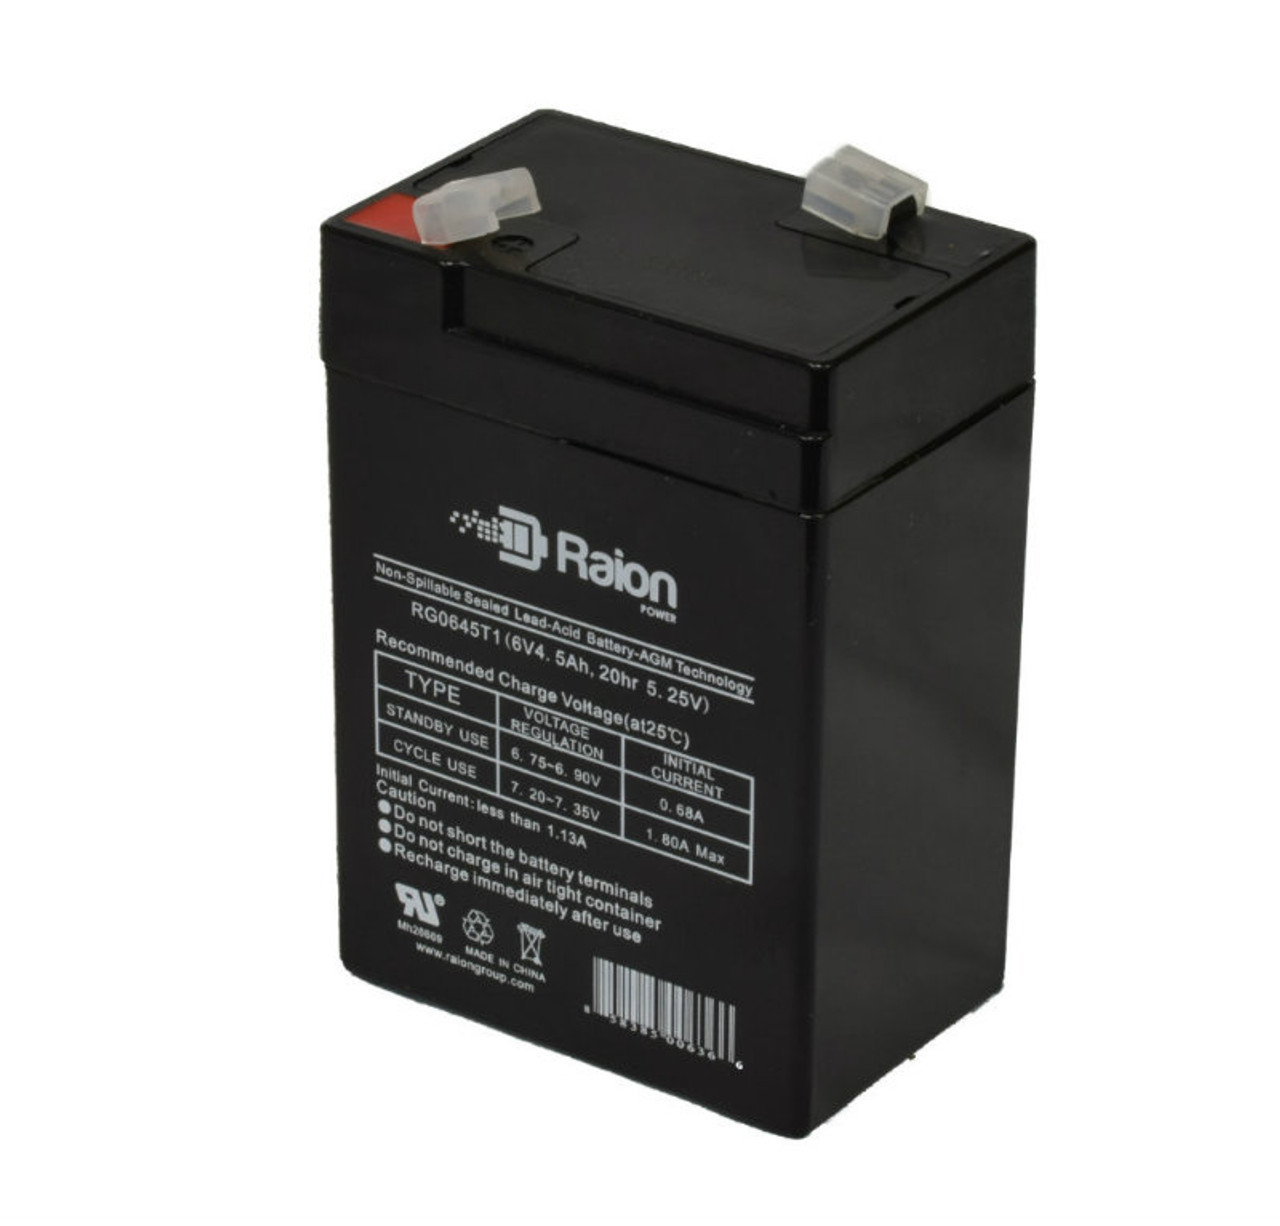 Raion Power RG0645T1 6V 4.5Ah Replacement Battery Cartridge for Topin TP6-4